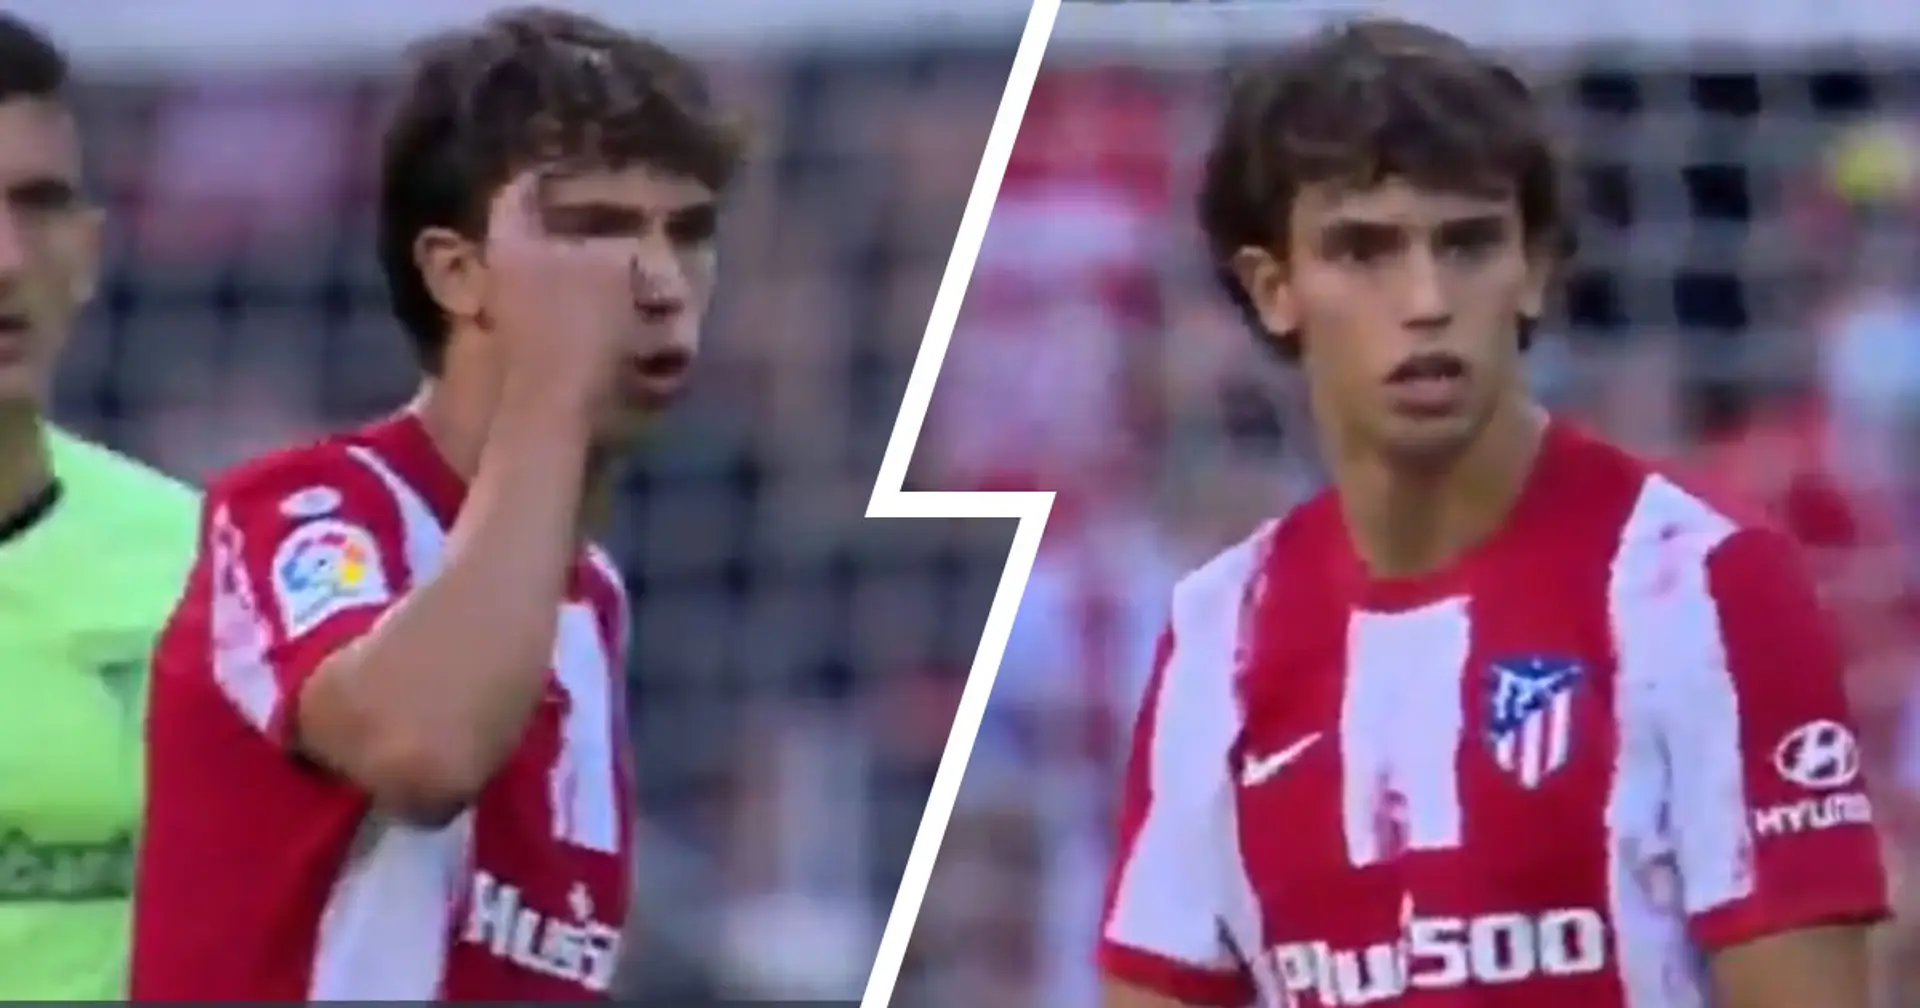 Joao Felix to be suspended for 4-12 games for making remark towards referee in Atletico Madrid game